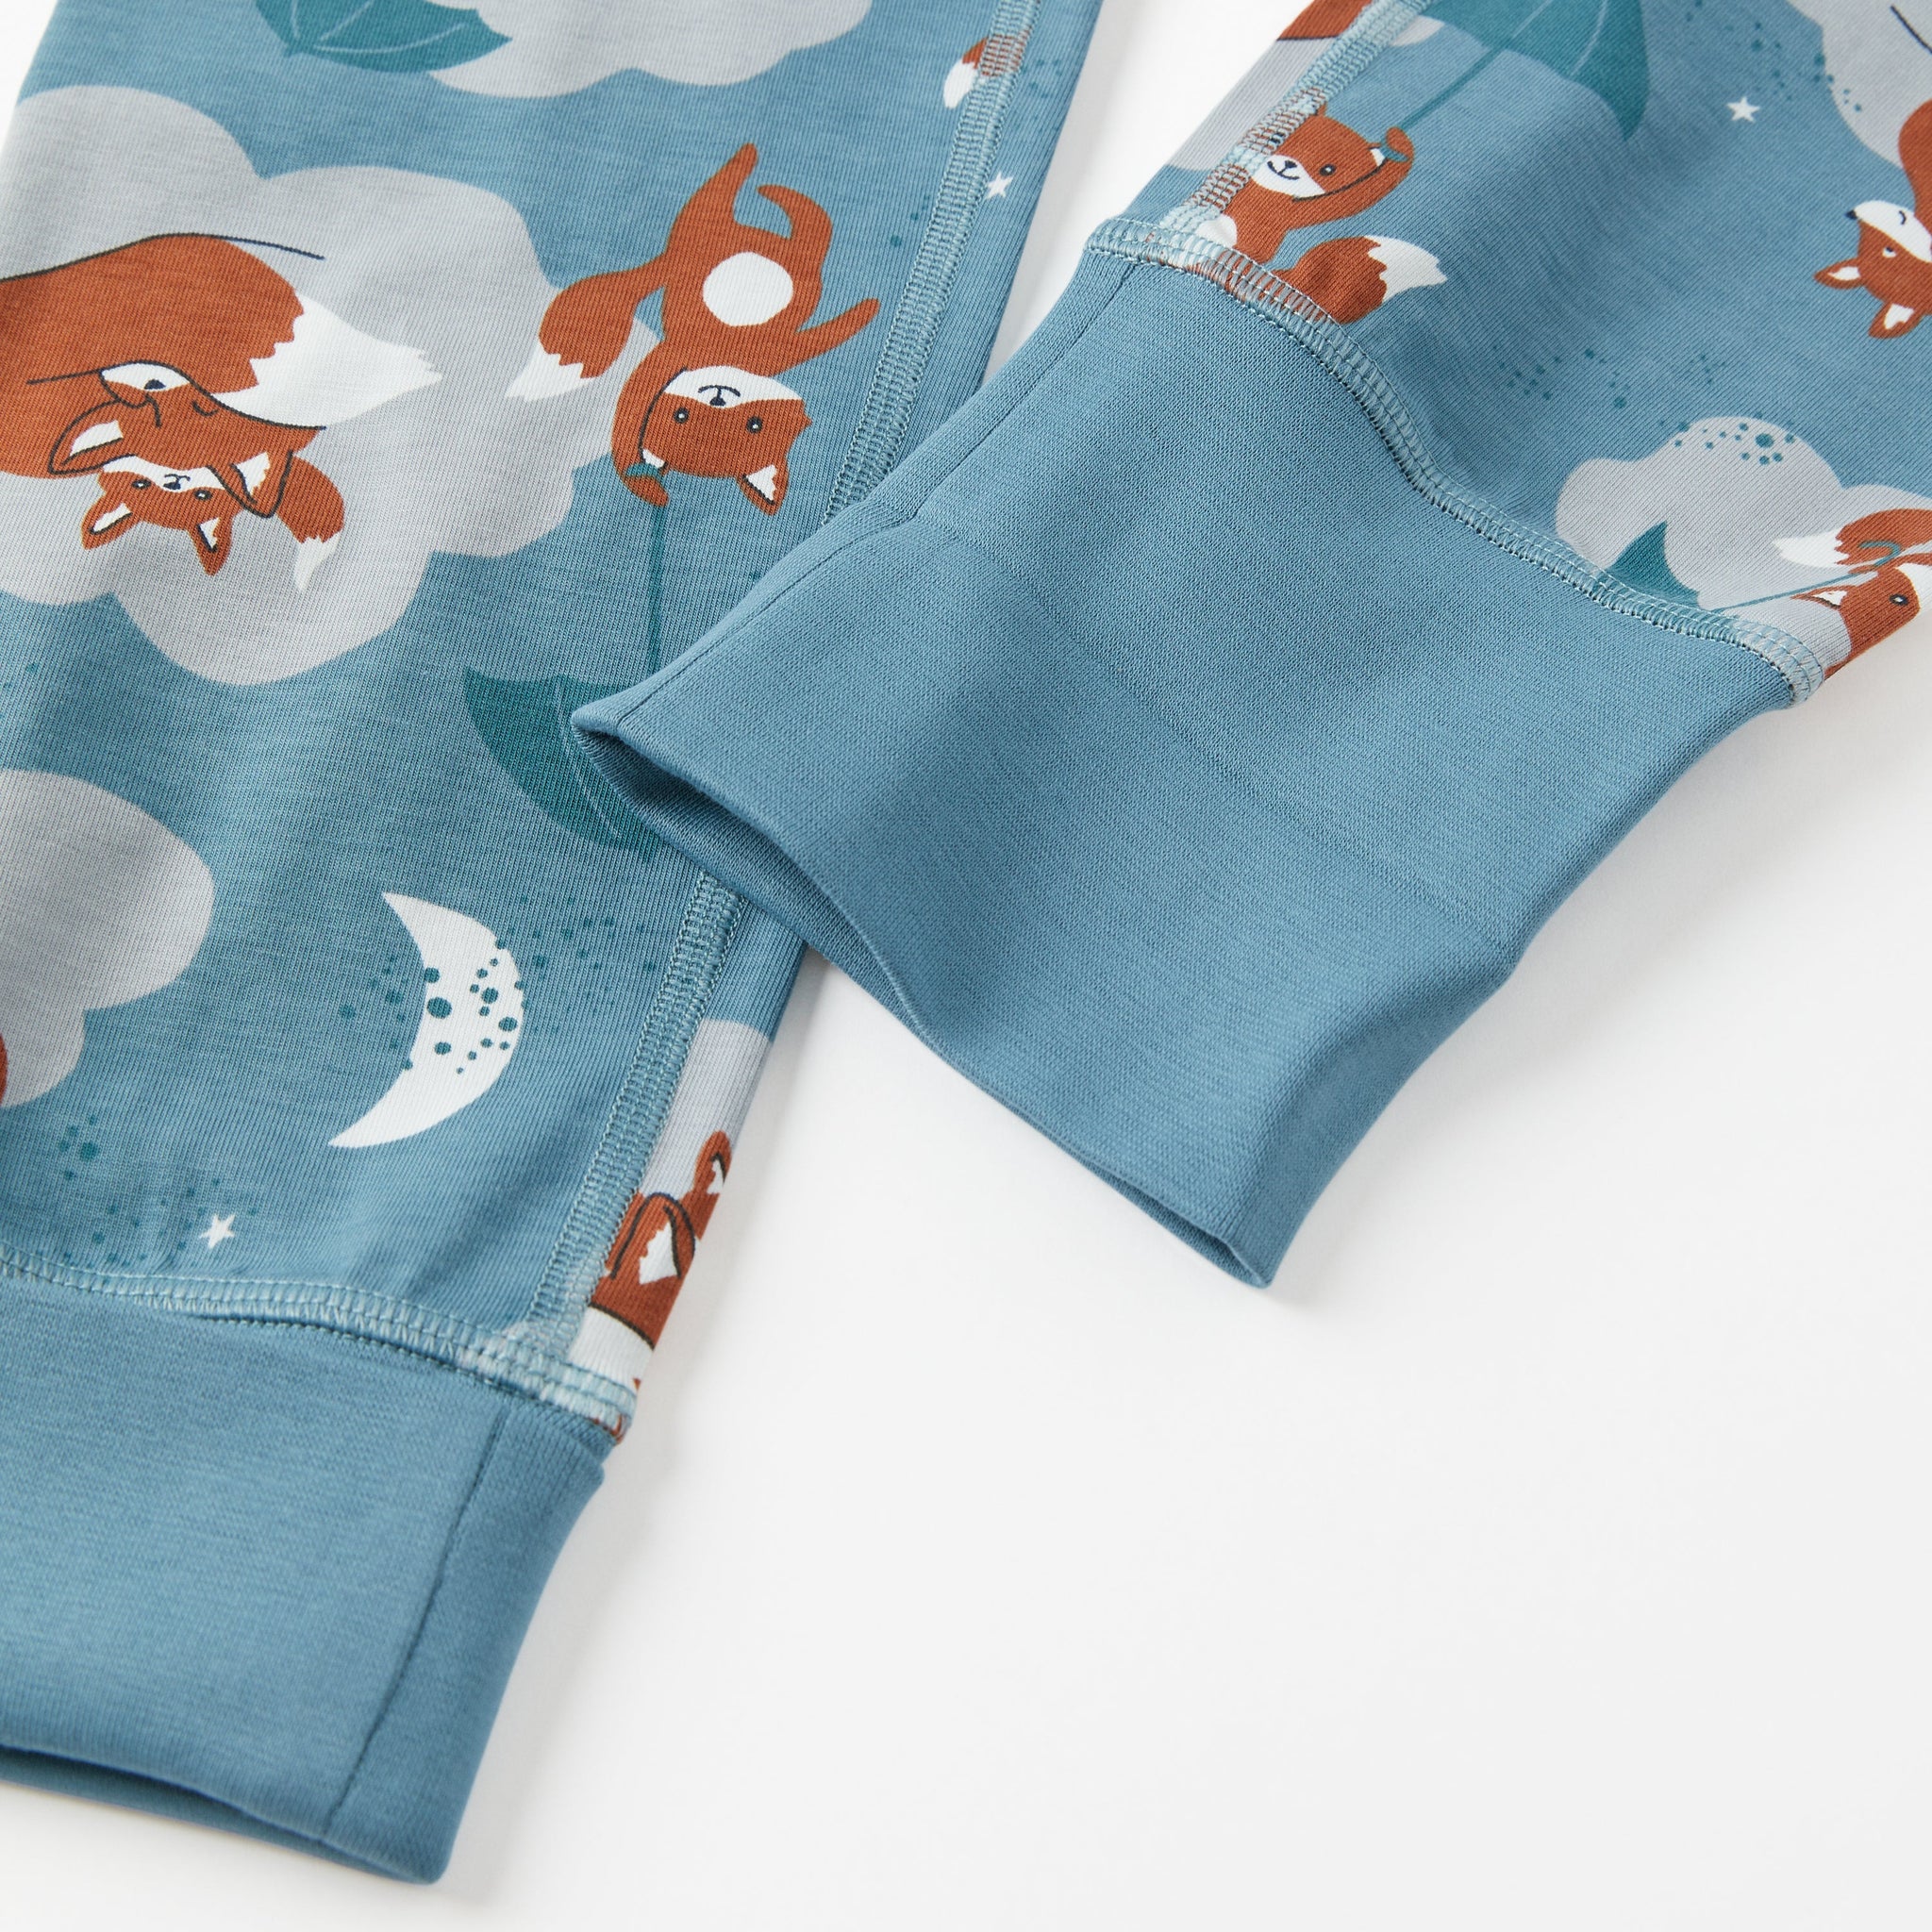 Fox Print Blue Kids Pyjamas from the Polarn O. Pyret kidswear collection. The best ethical kids clothes